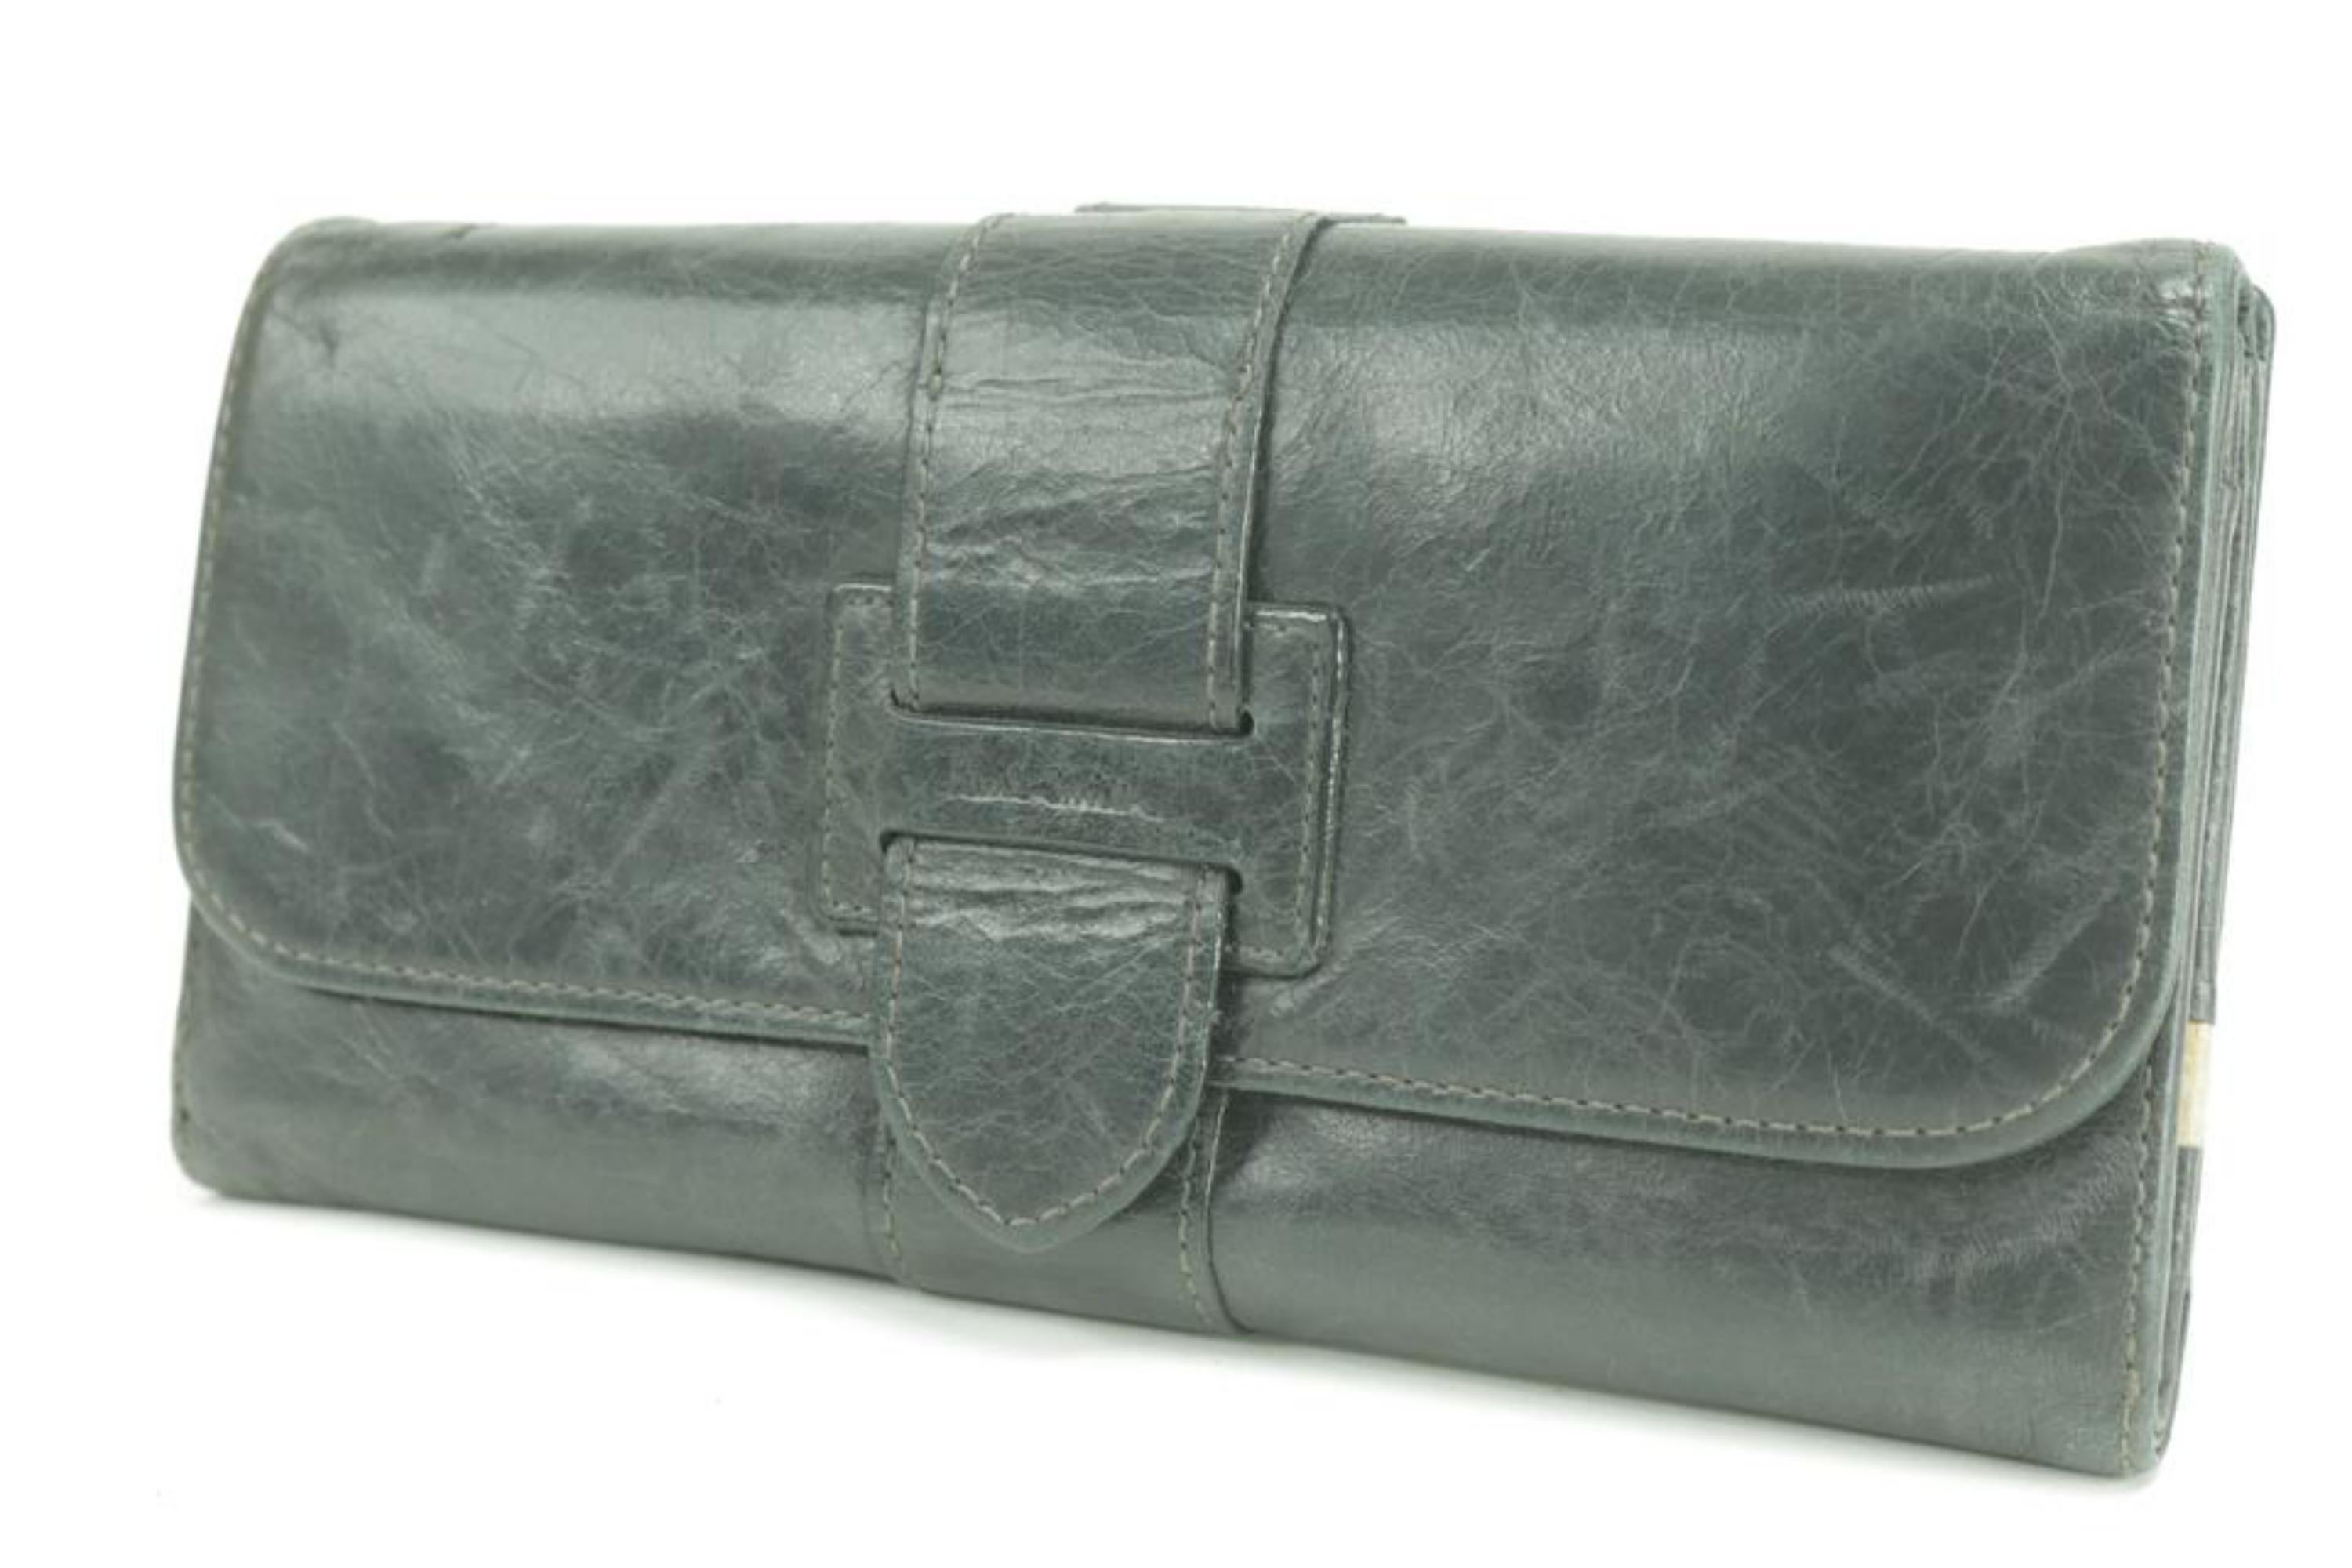 Paul Smith Belt Long Flap Wallet Black Leather Bifold 0M46
Made In:
Measurements: Length: 7.5